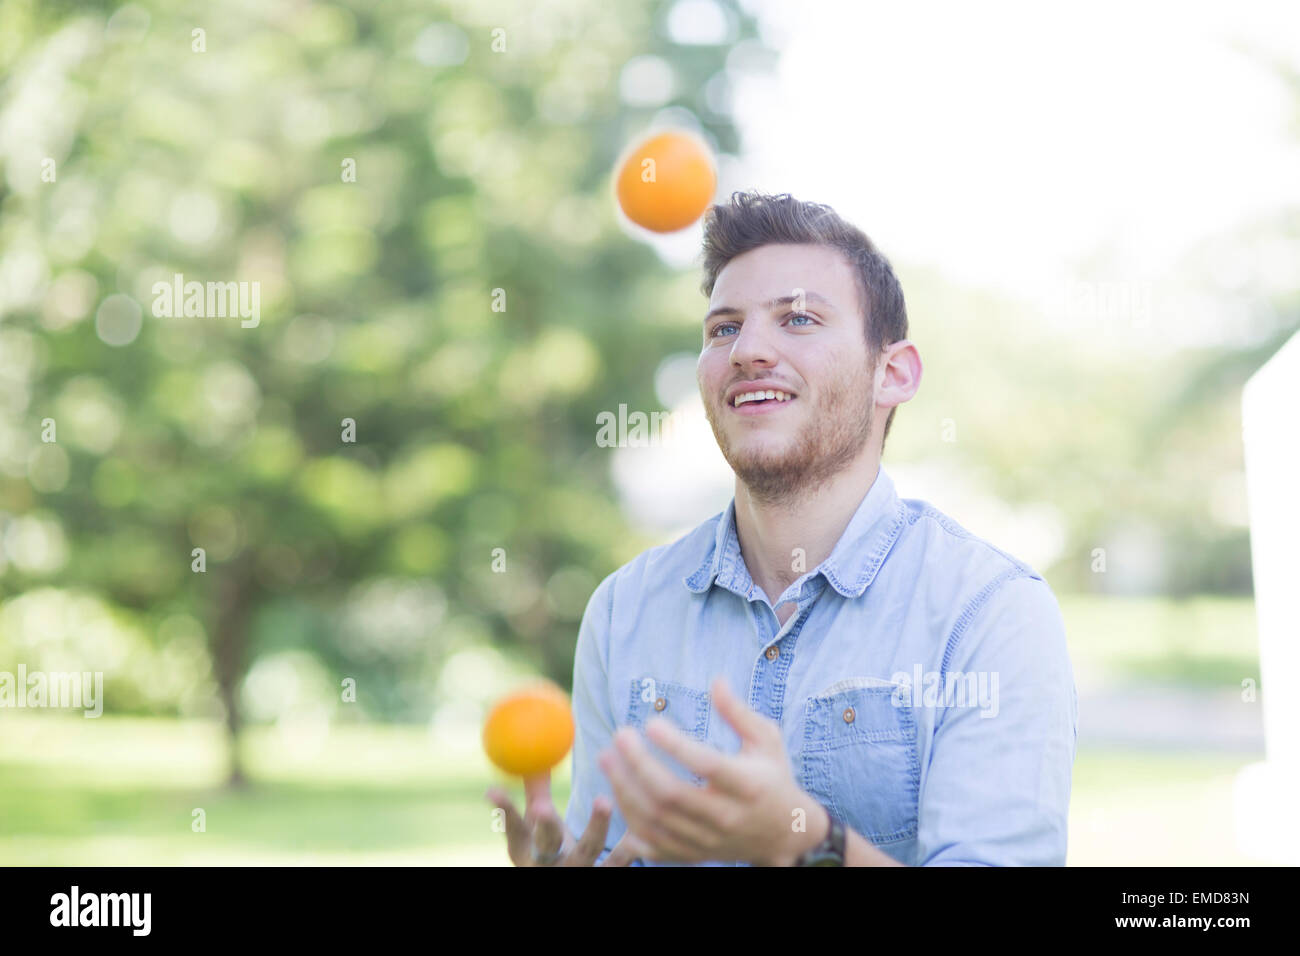 Young man juggling with oranges outdoors Stock Photo